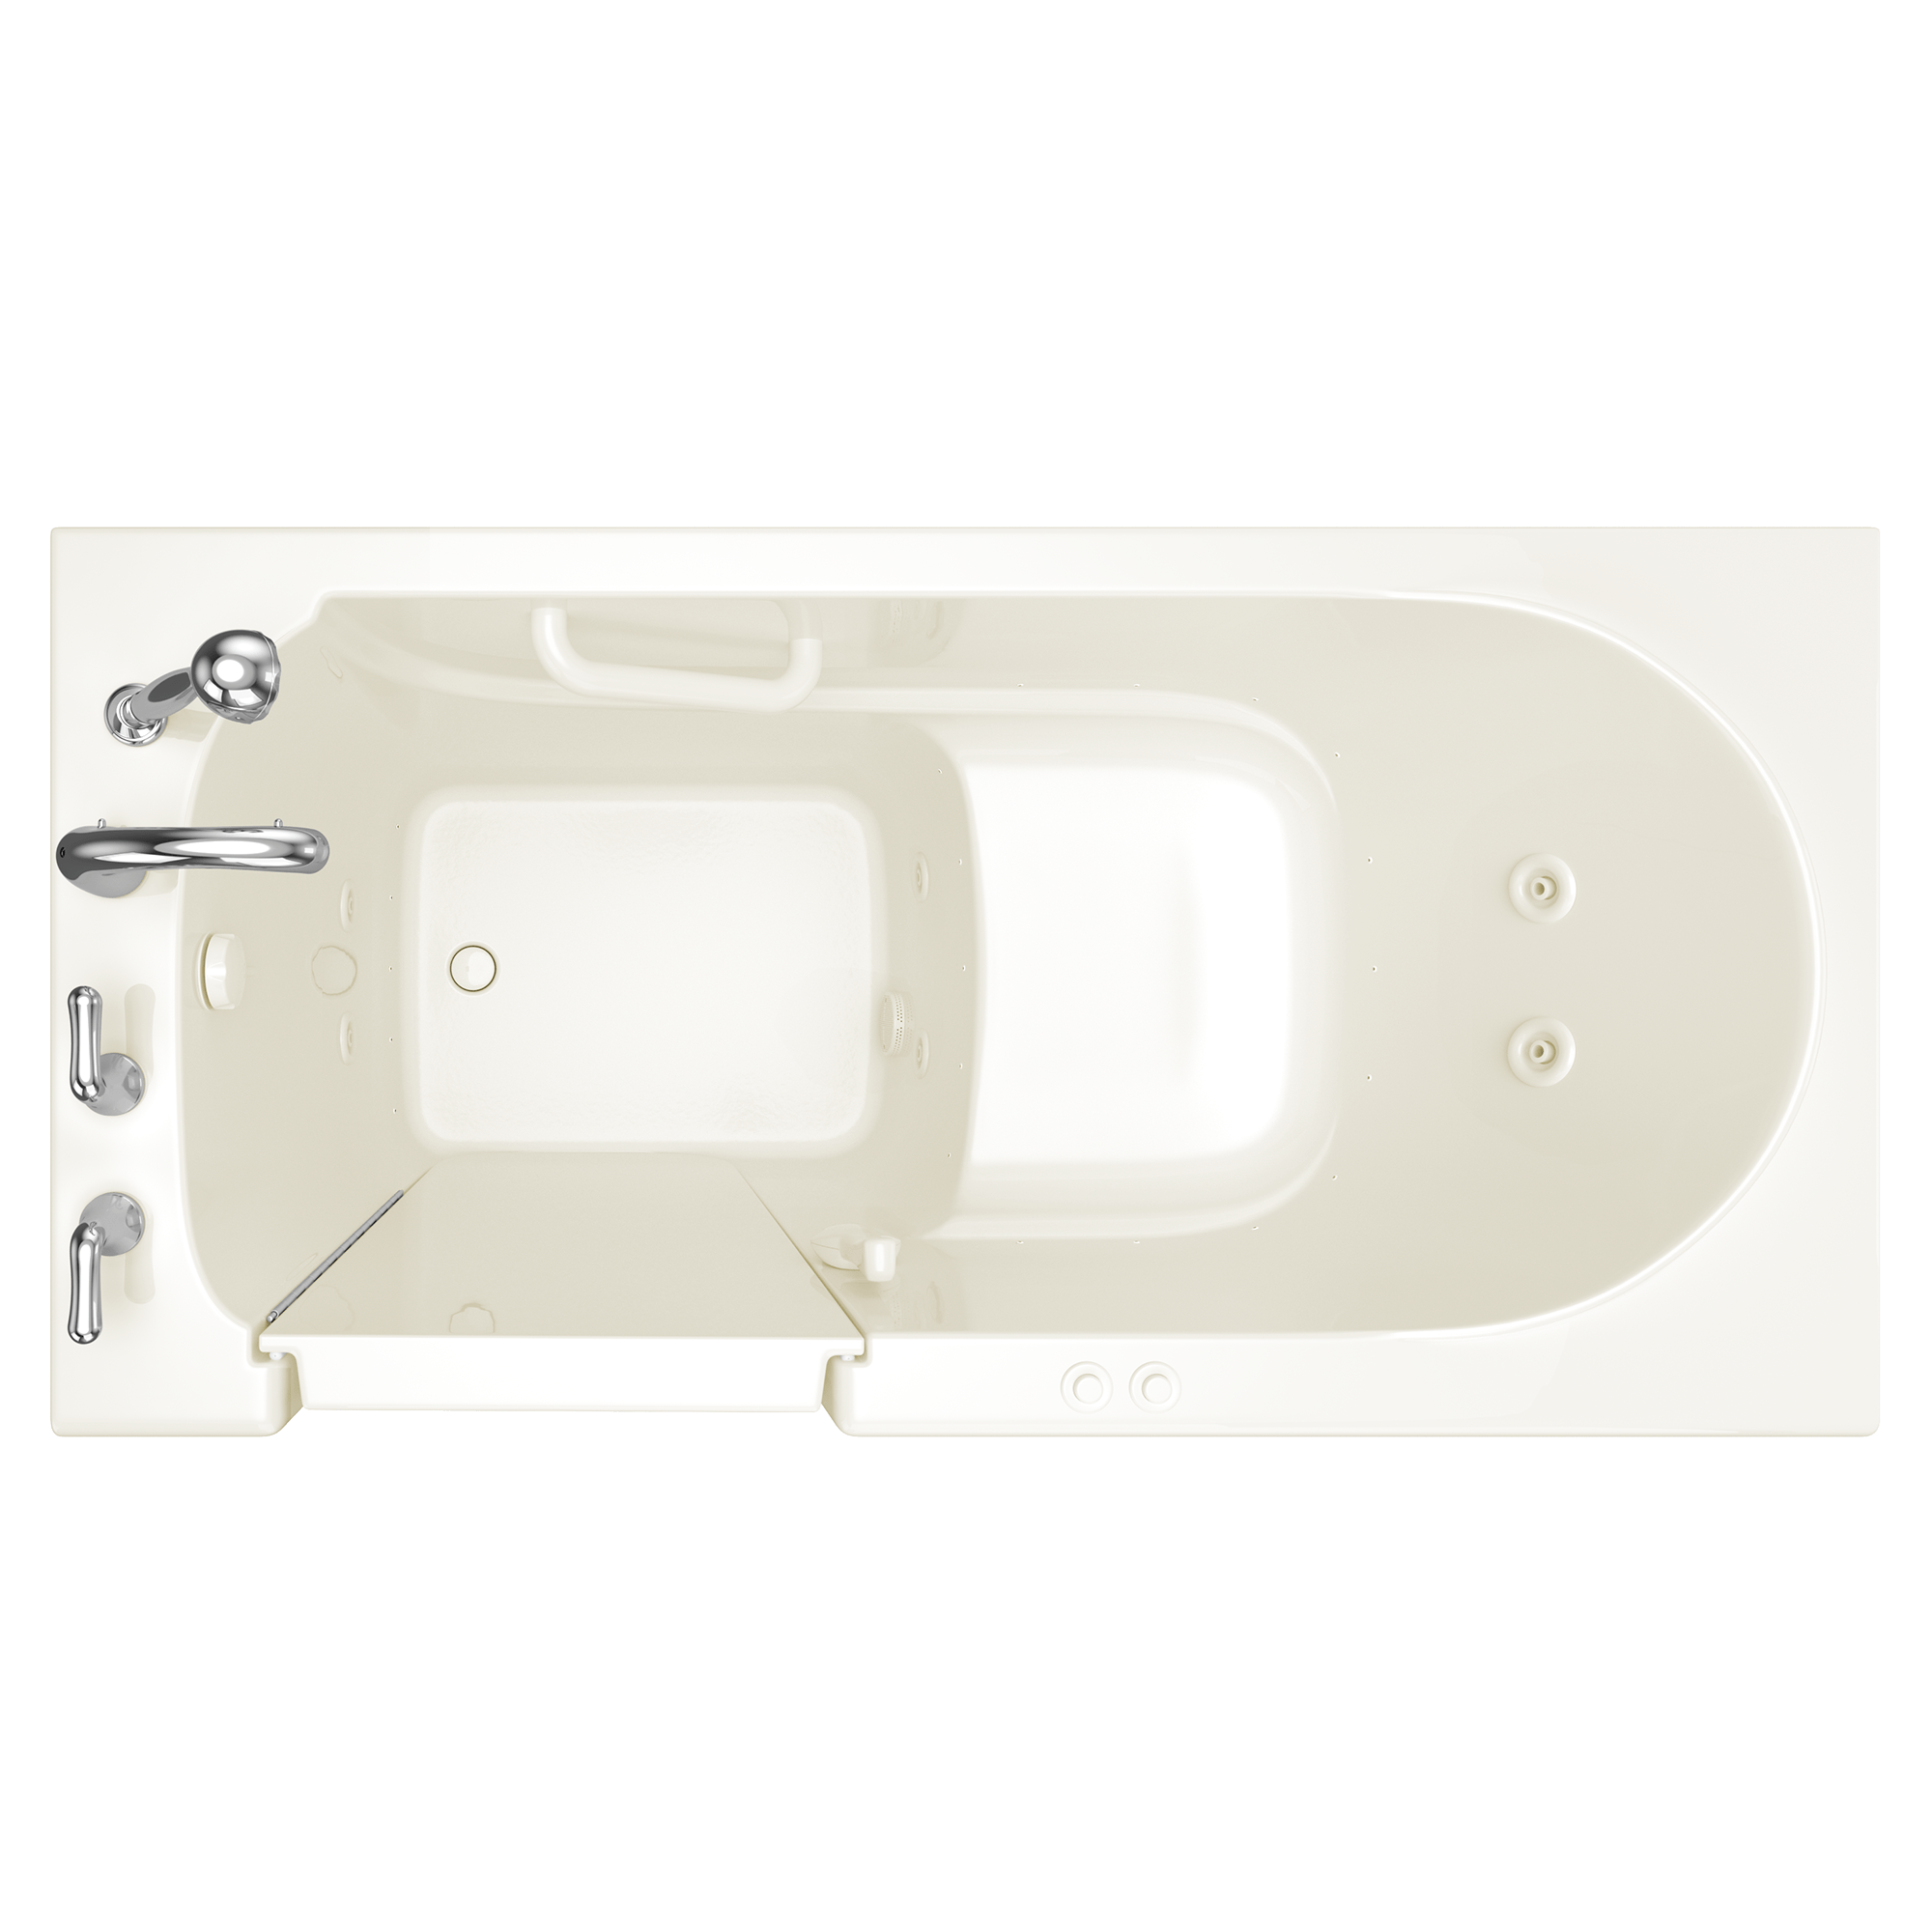 Gelcoat Entry Series 60 x 30 Inch Walk In Tub With Combination Air Spa and Whirlpool Systems - Left Hand Drain With Faucet ST BISCUIT